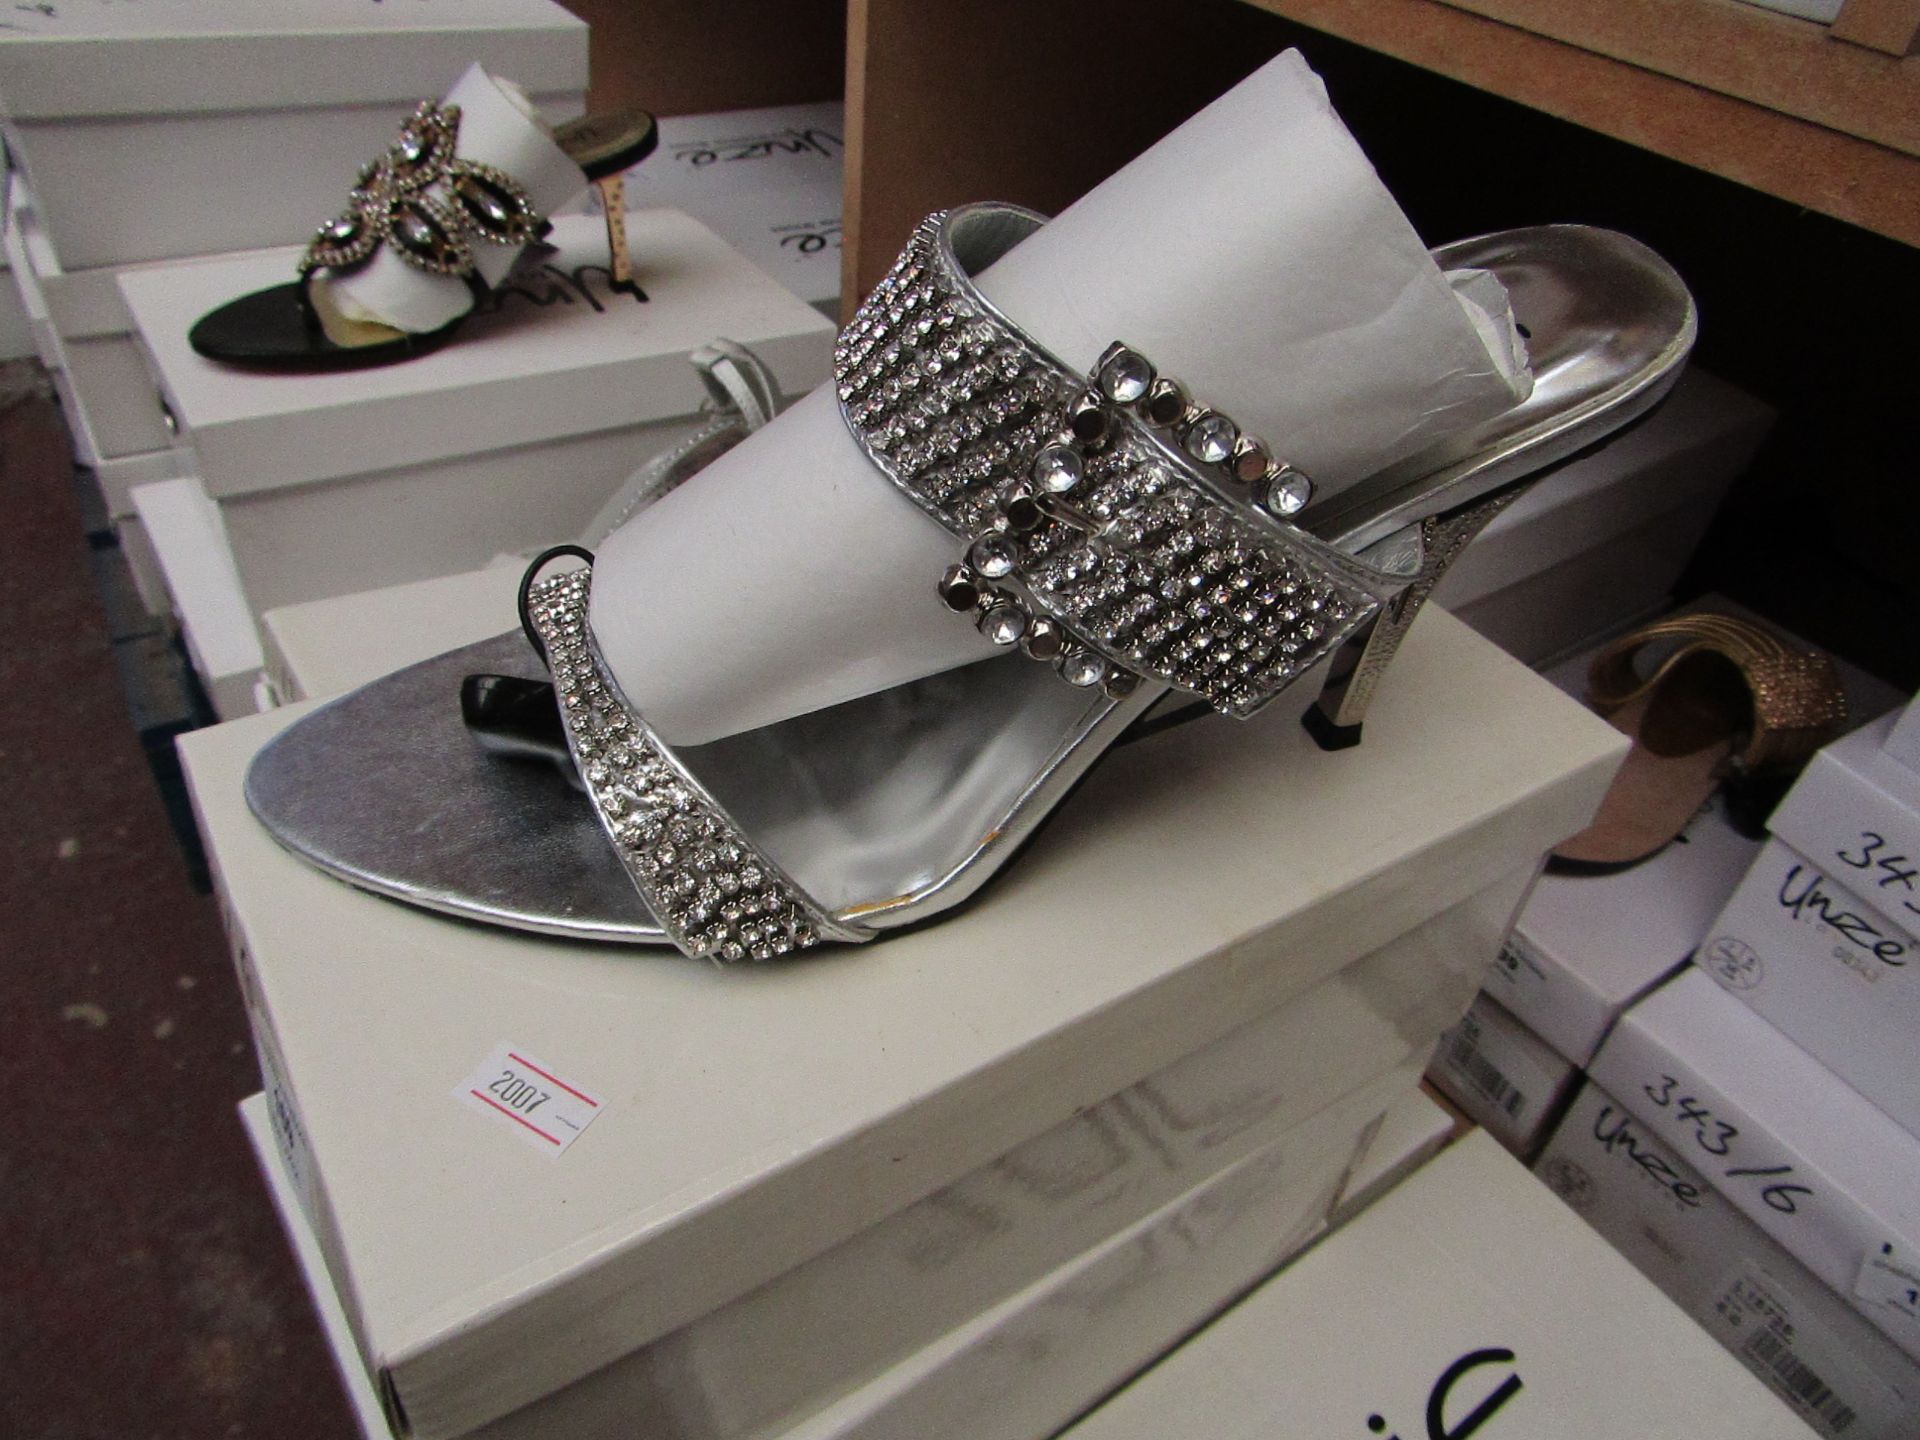 Unze by Shalamar Shoes Ladies Silver & Diamante Shoes size 7 new & boxed see image for design